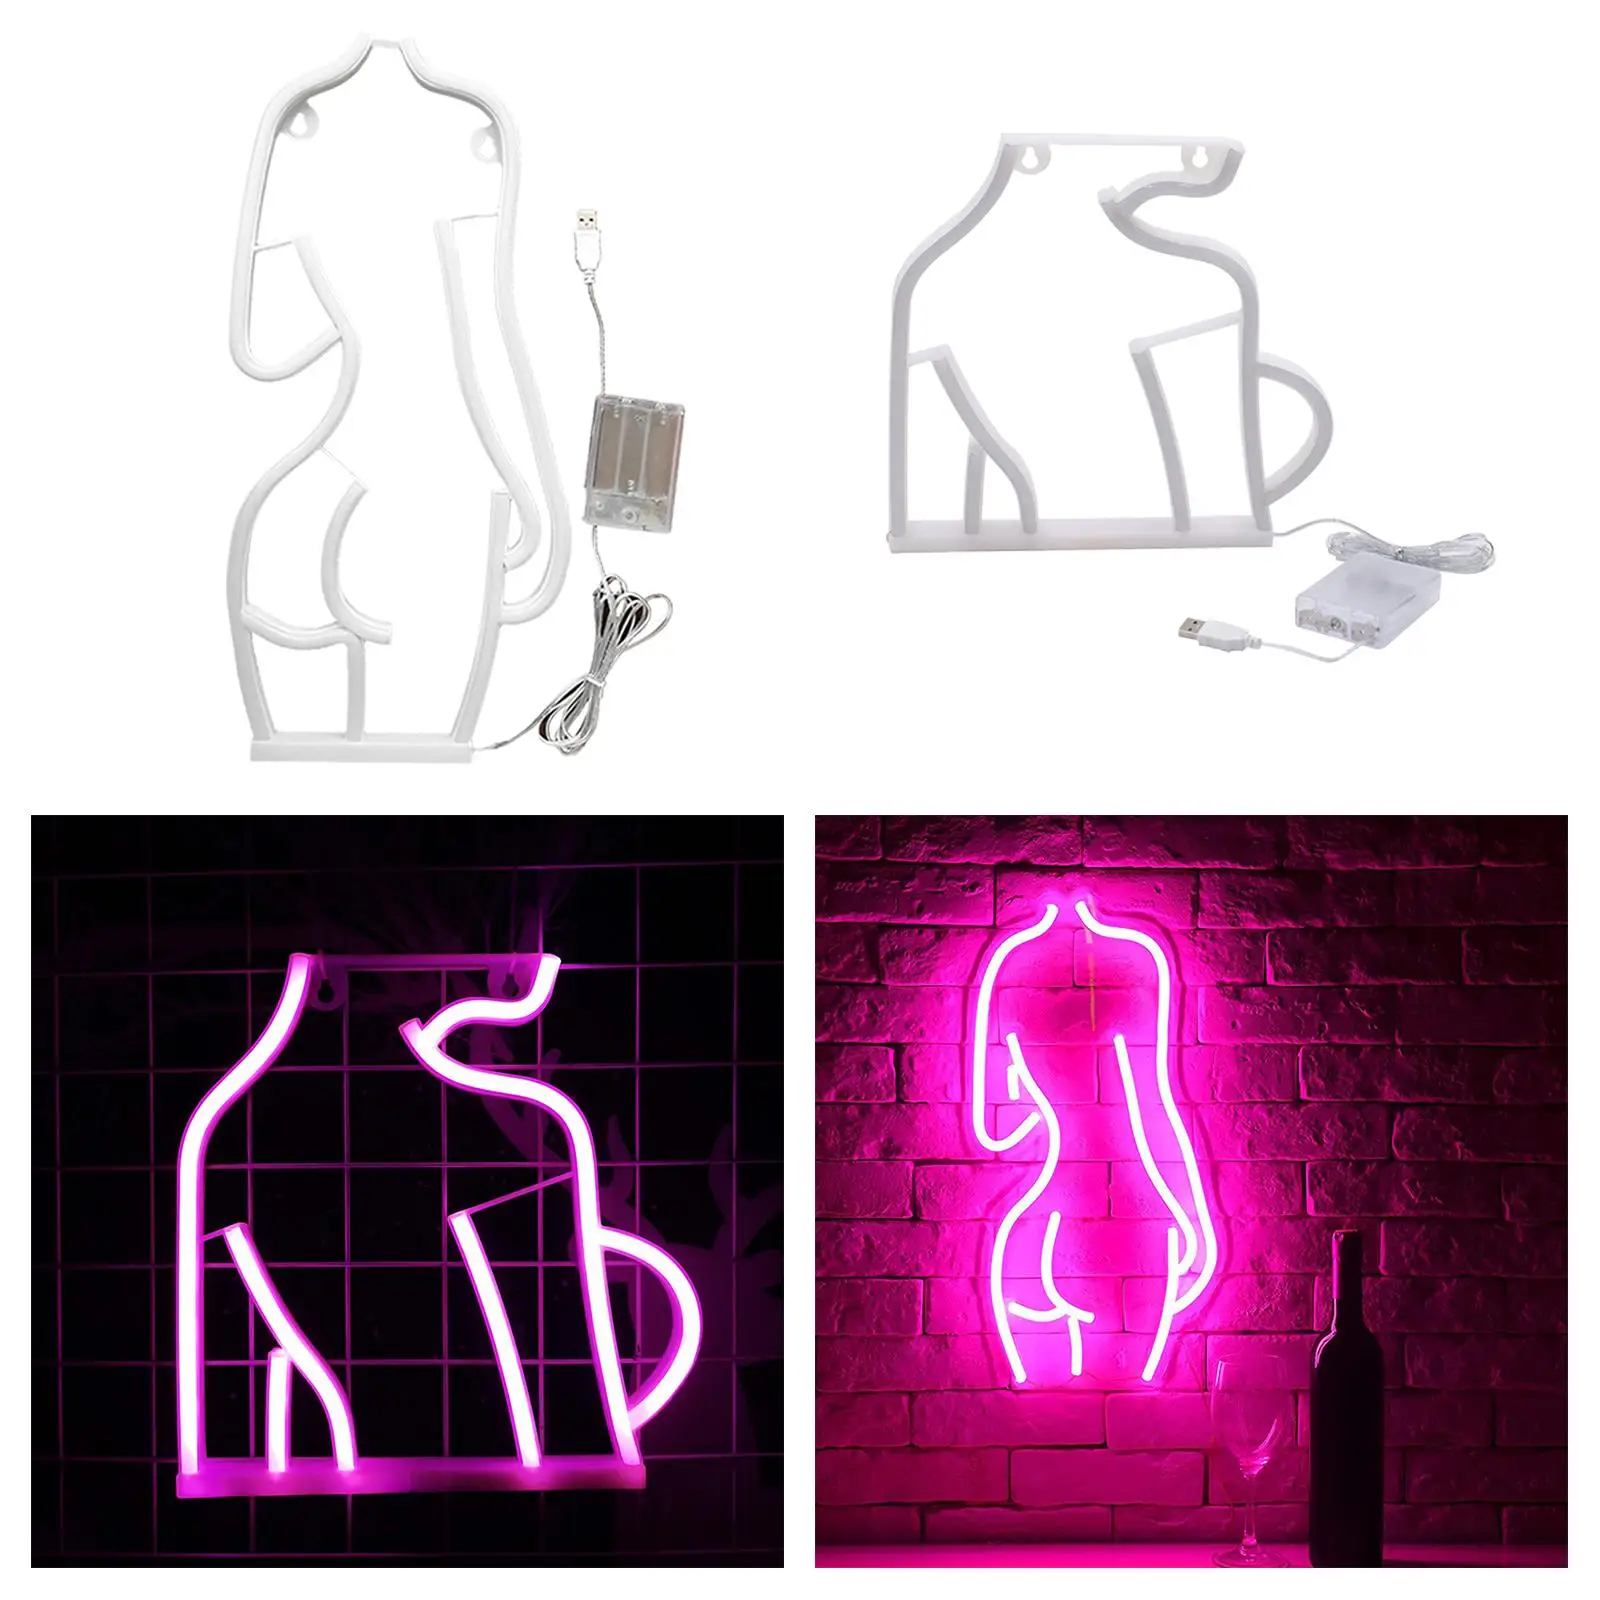 Lady Back Girls Woman Body Neon Sign Hanging Lamp Wall Decor LED Night Lights Decorative Light for Store Bedroom Hotel Wall